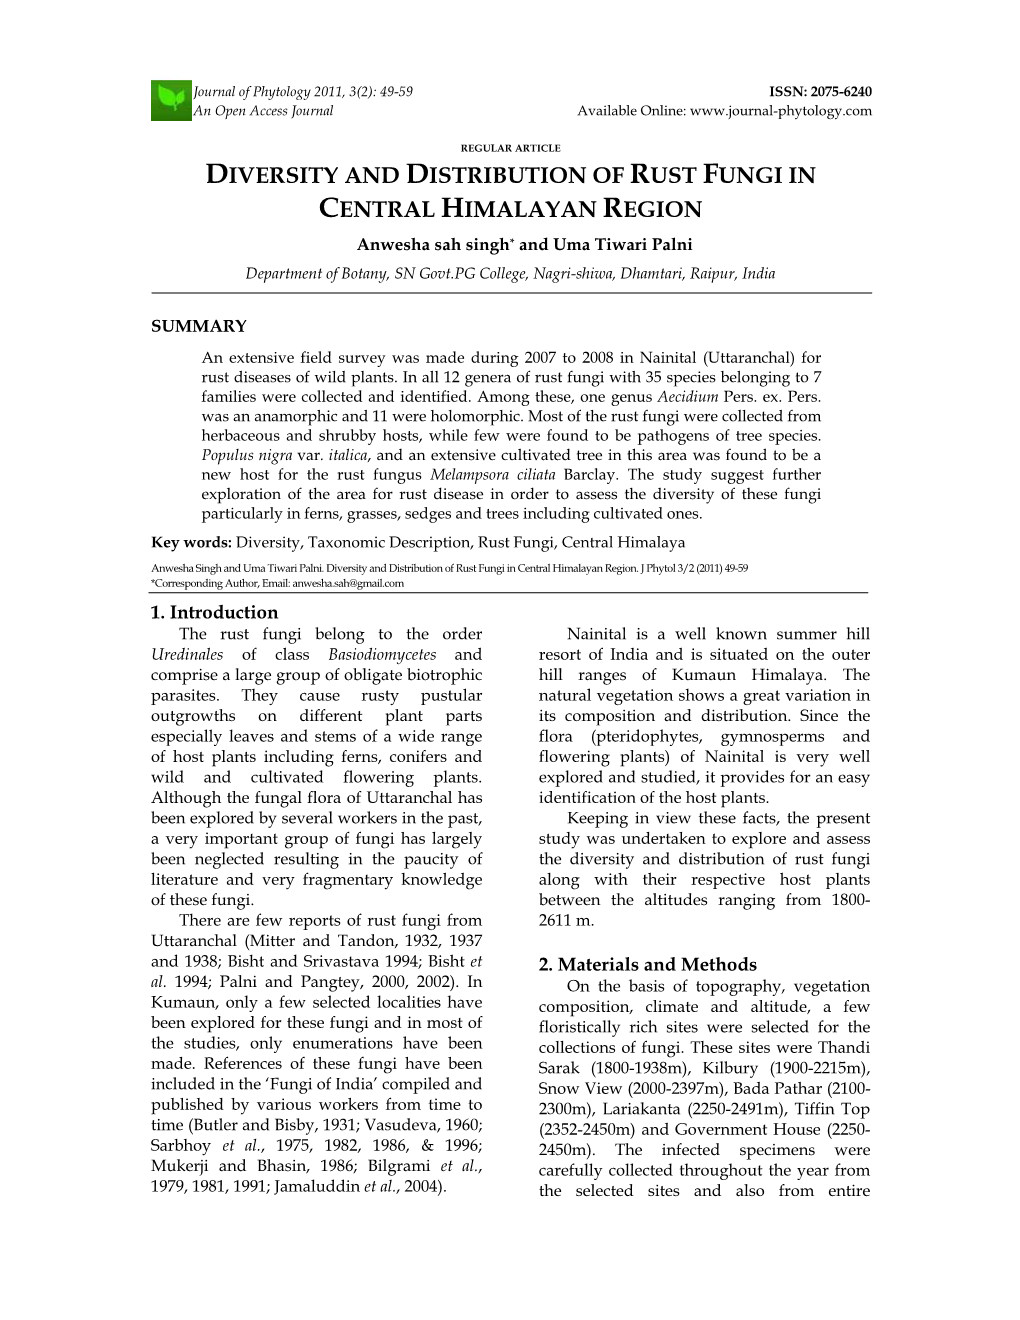 Diversity and Distribution of Rust Fungi in Central